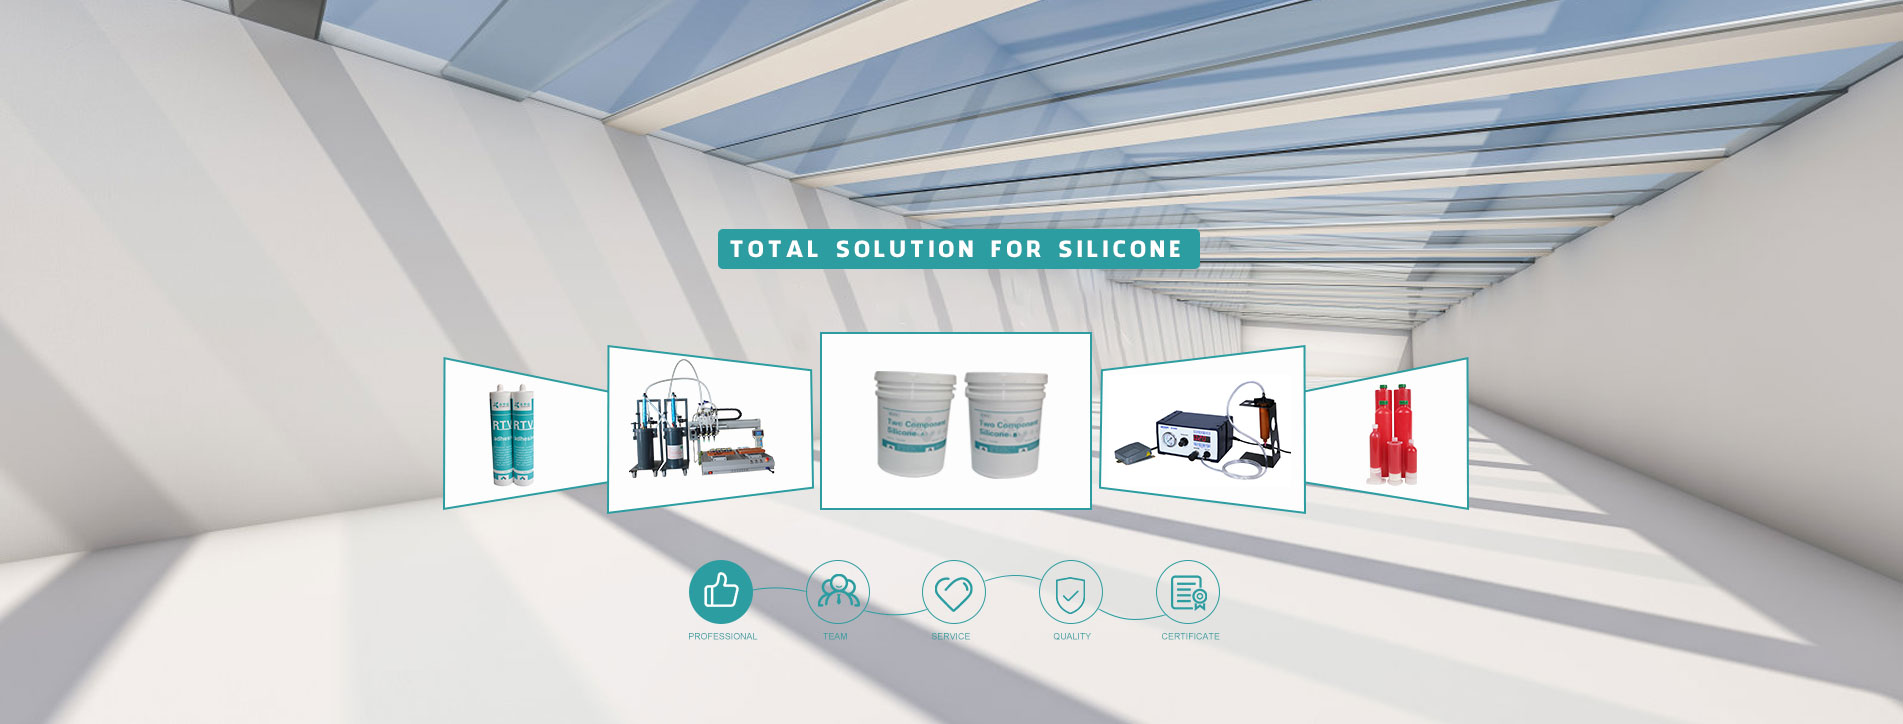 Total Solution for Silicone